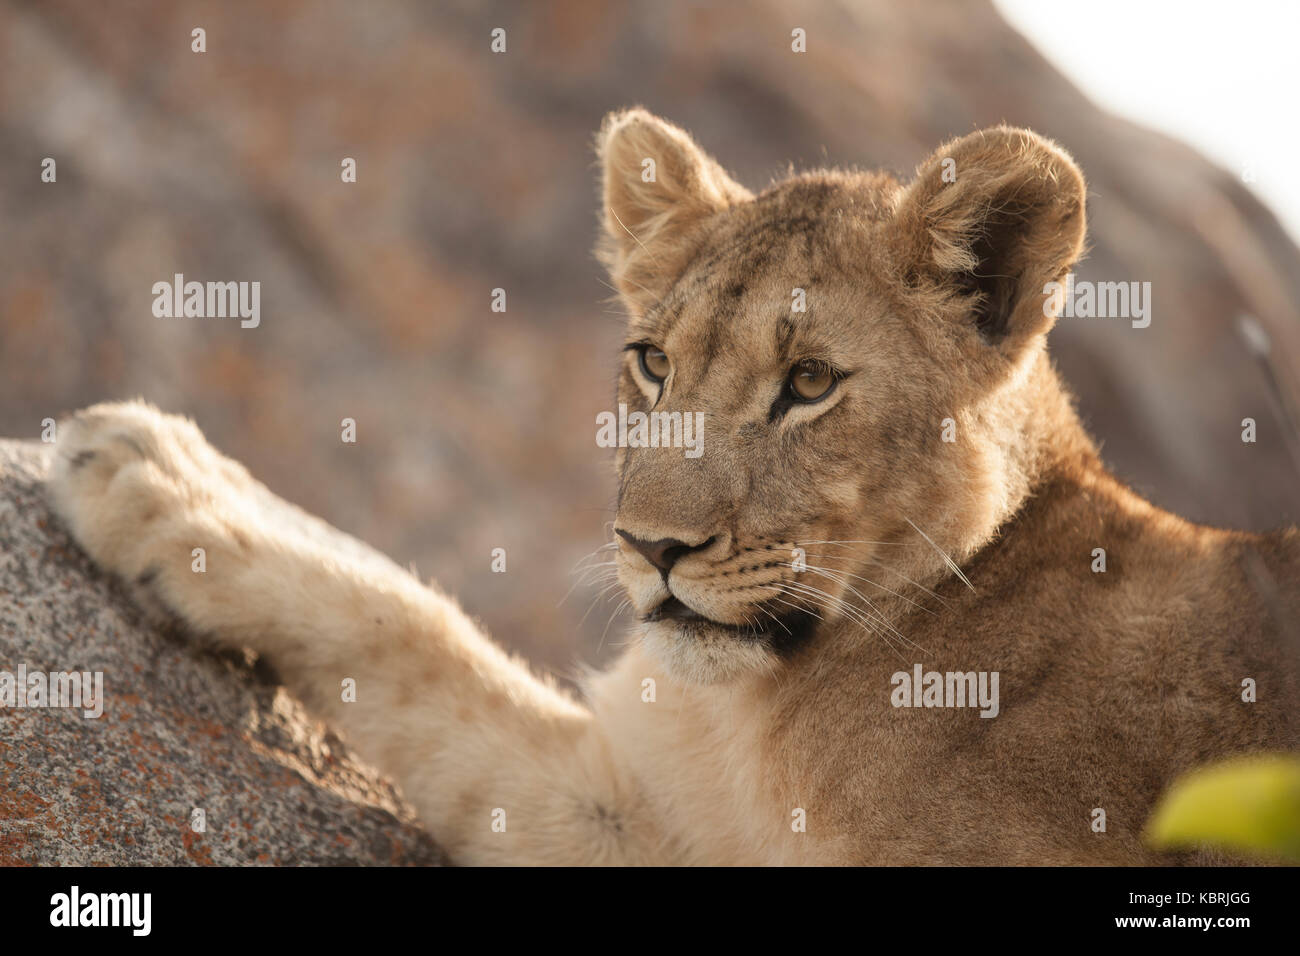 young lion close up on rocks, paw resting on rocks Stock Photo